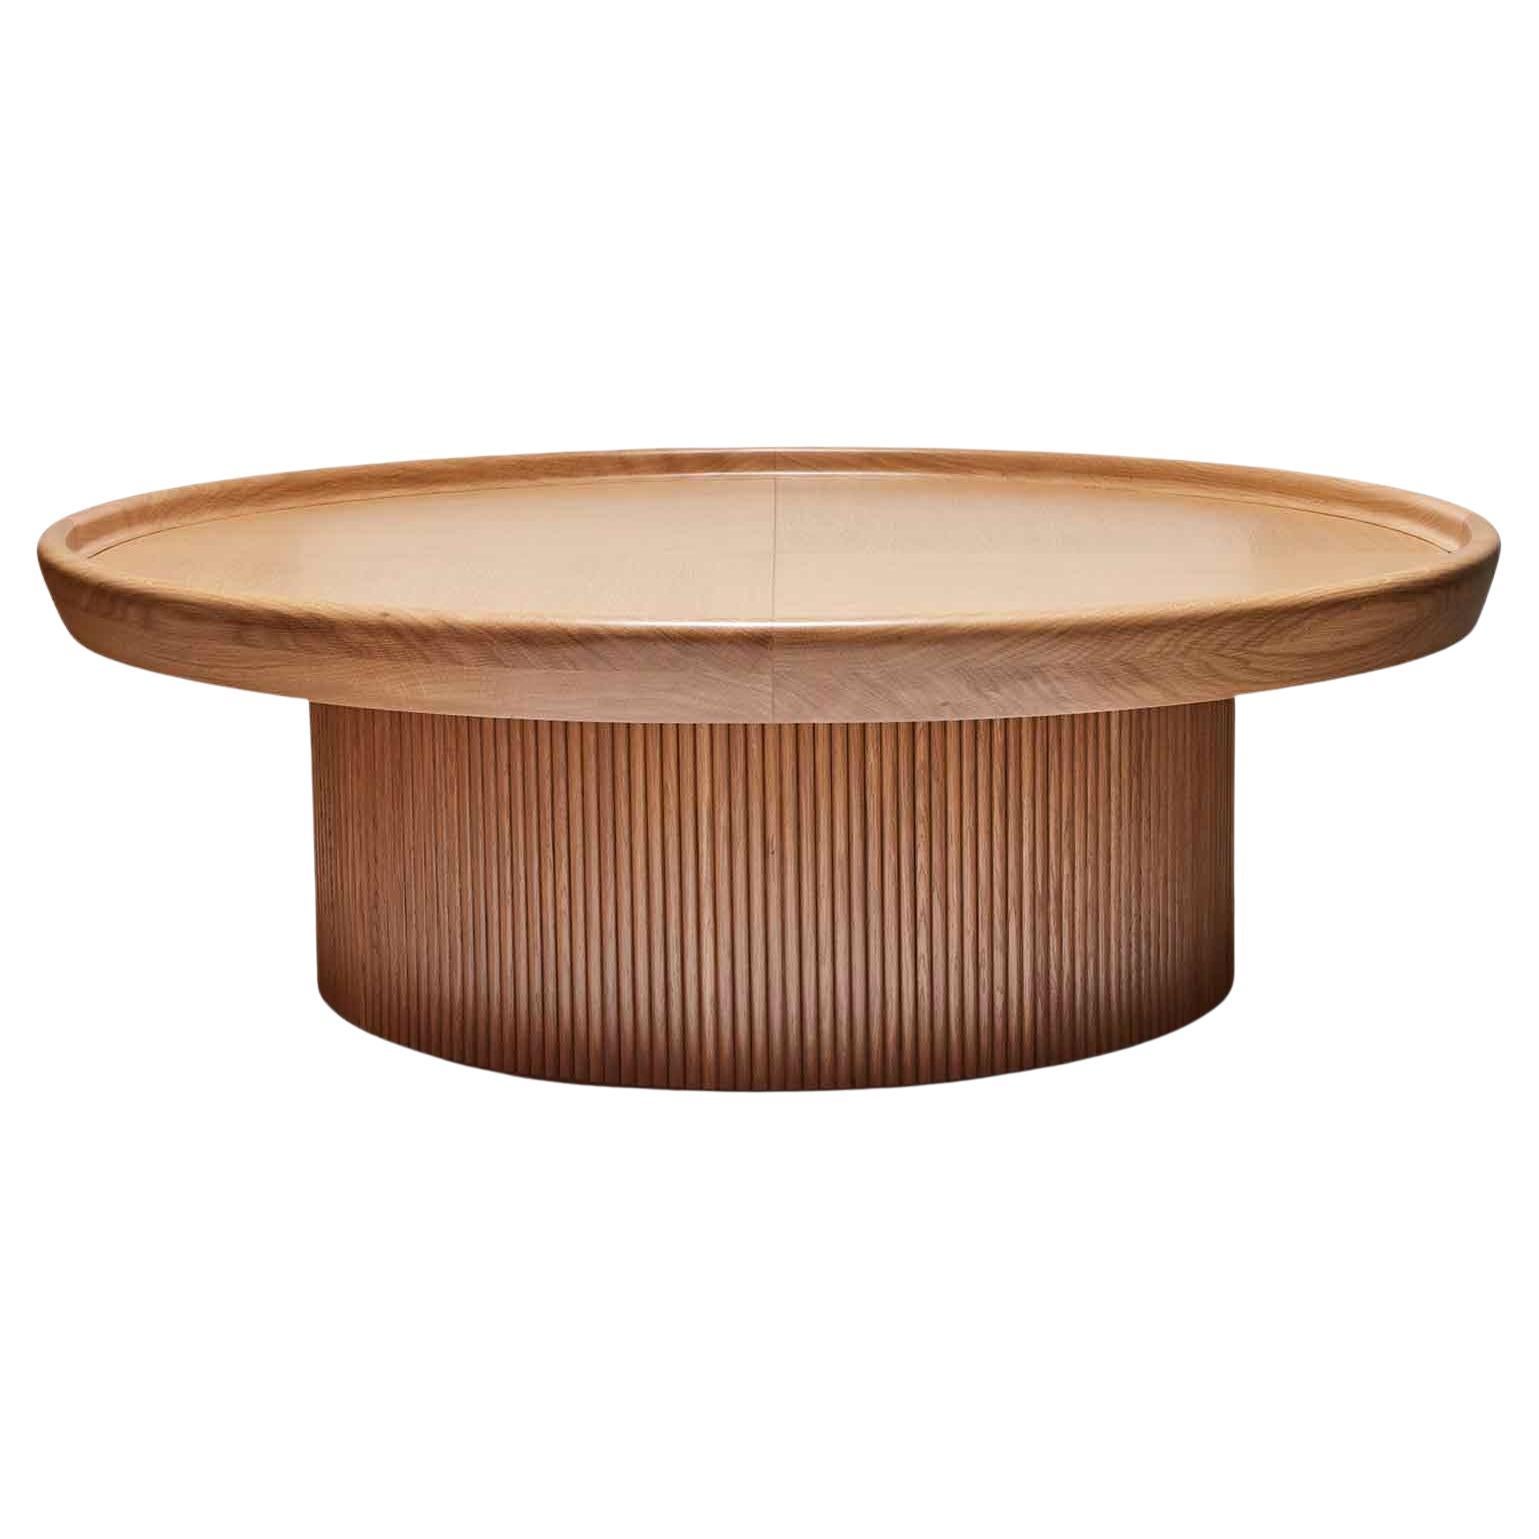 Oak Ojai Coffee Table by Lawson-Fenning. The Ojai coffee table features a round top with marquetry and a drum-shaped base with tambour details. Available in American walnut or white oak. 

The Lawson-Fenning Collection is designed and handmade in